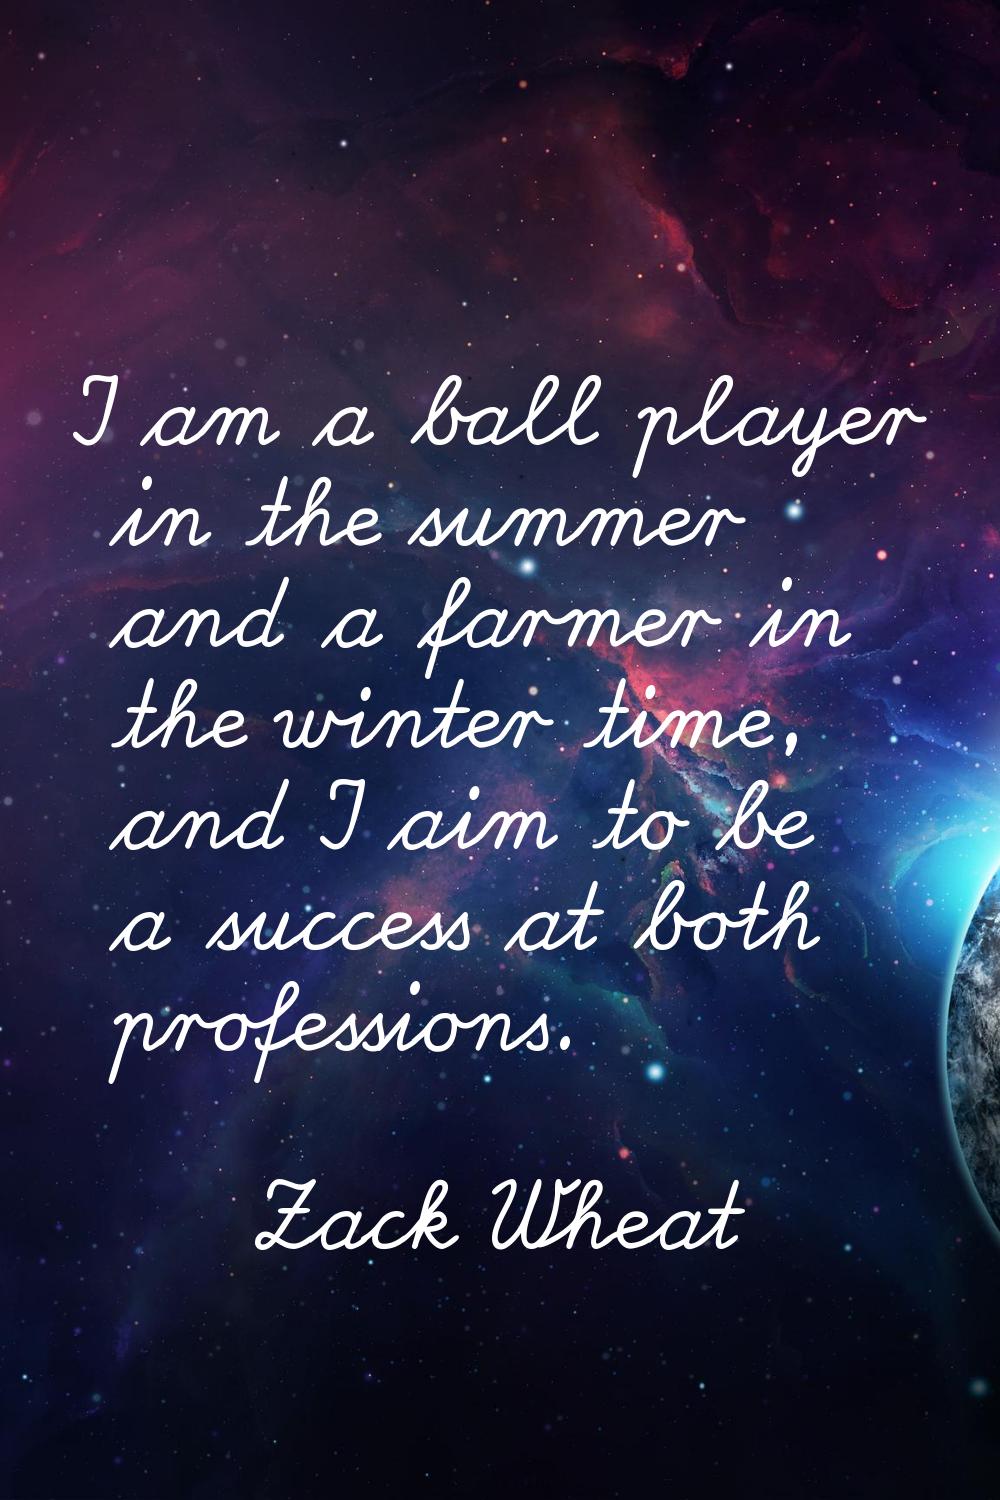 I am a ball player in the summer and a farmer in the winter time, and I aim to be a success at both